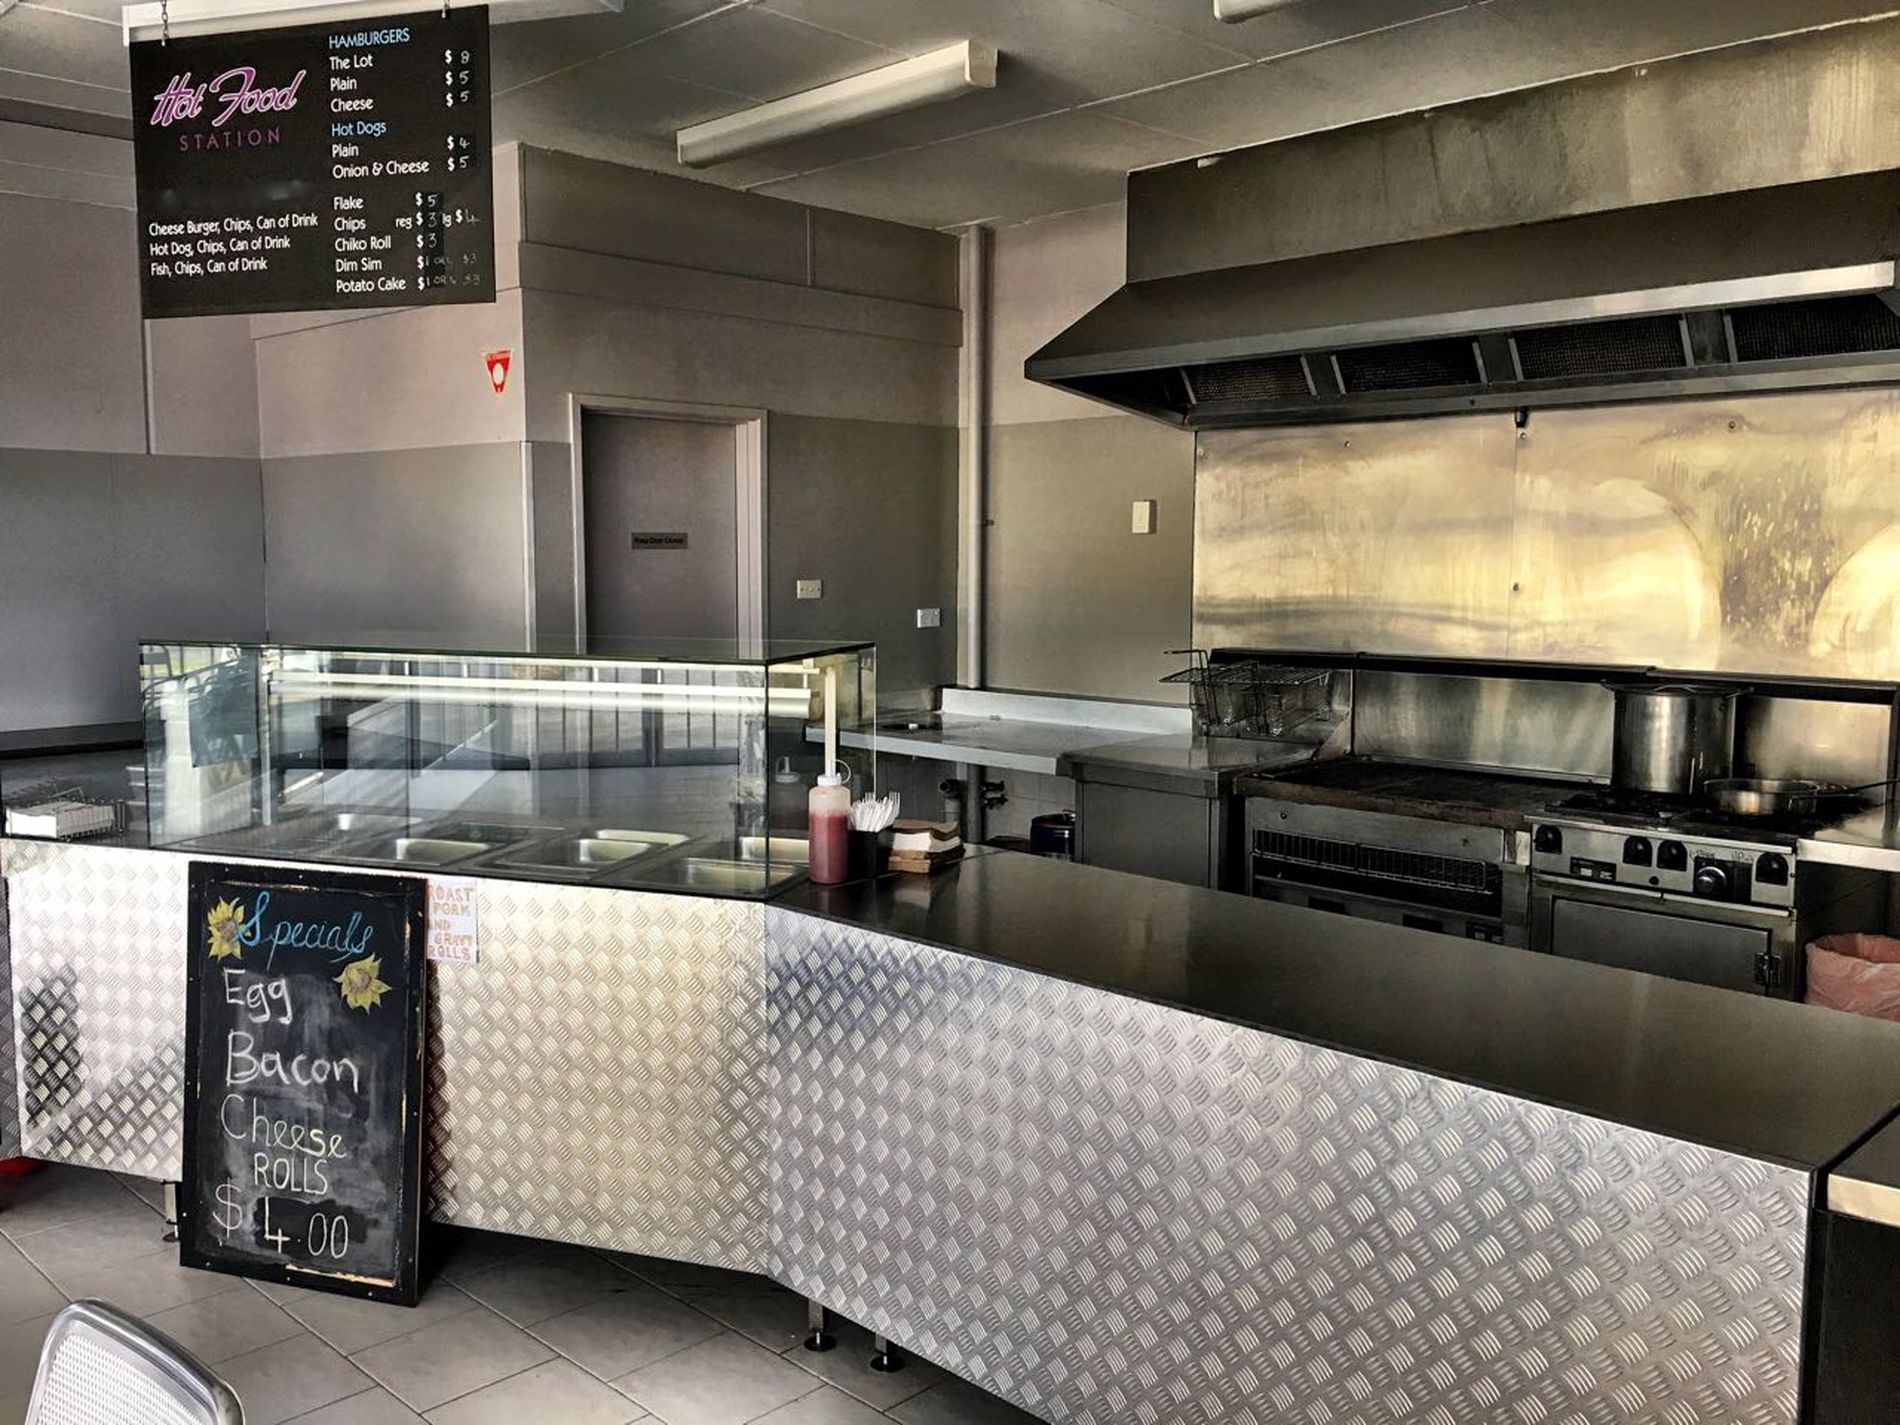 SOLD - Industrial Lifestyle Cafe Takeaway Business For Sale